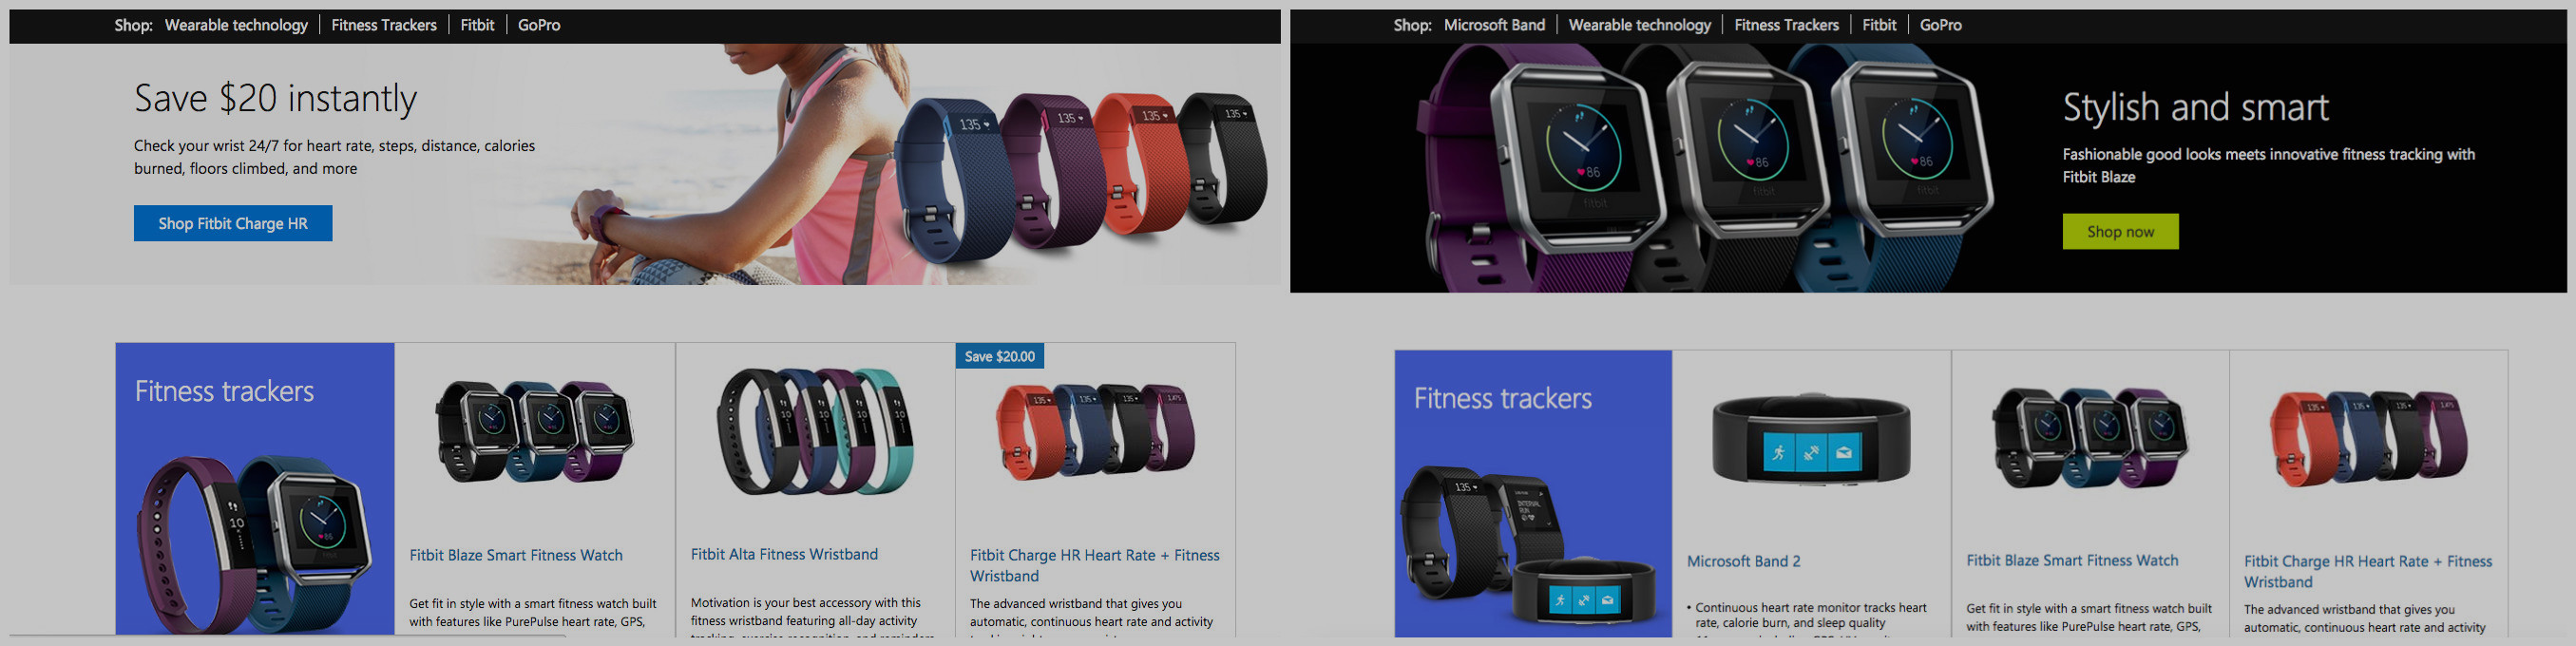 Microsoft Band Removed From Website; No Plans For Band 3